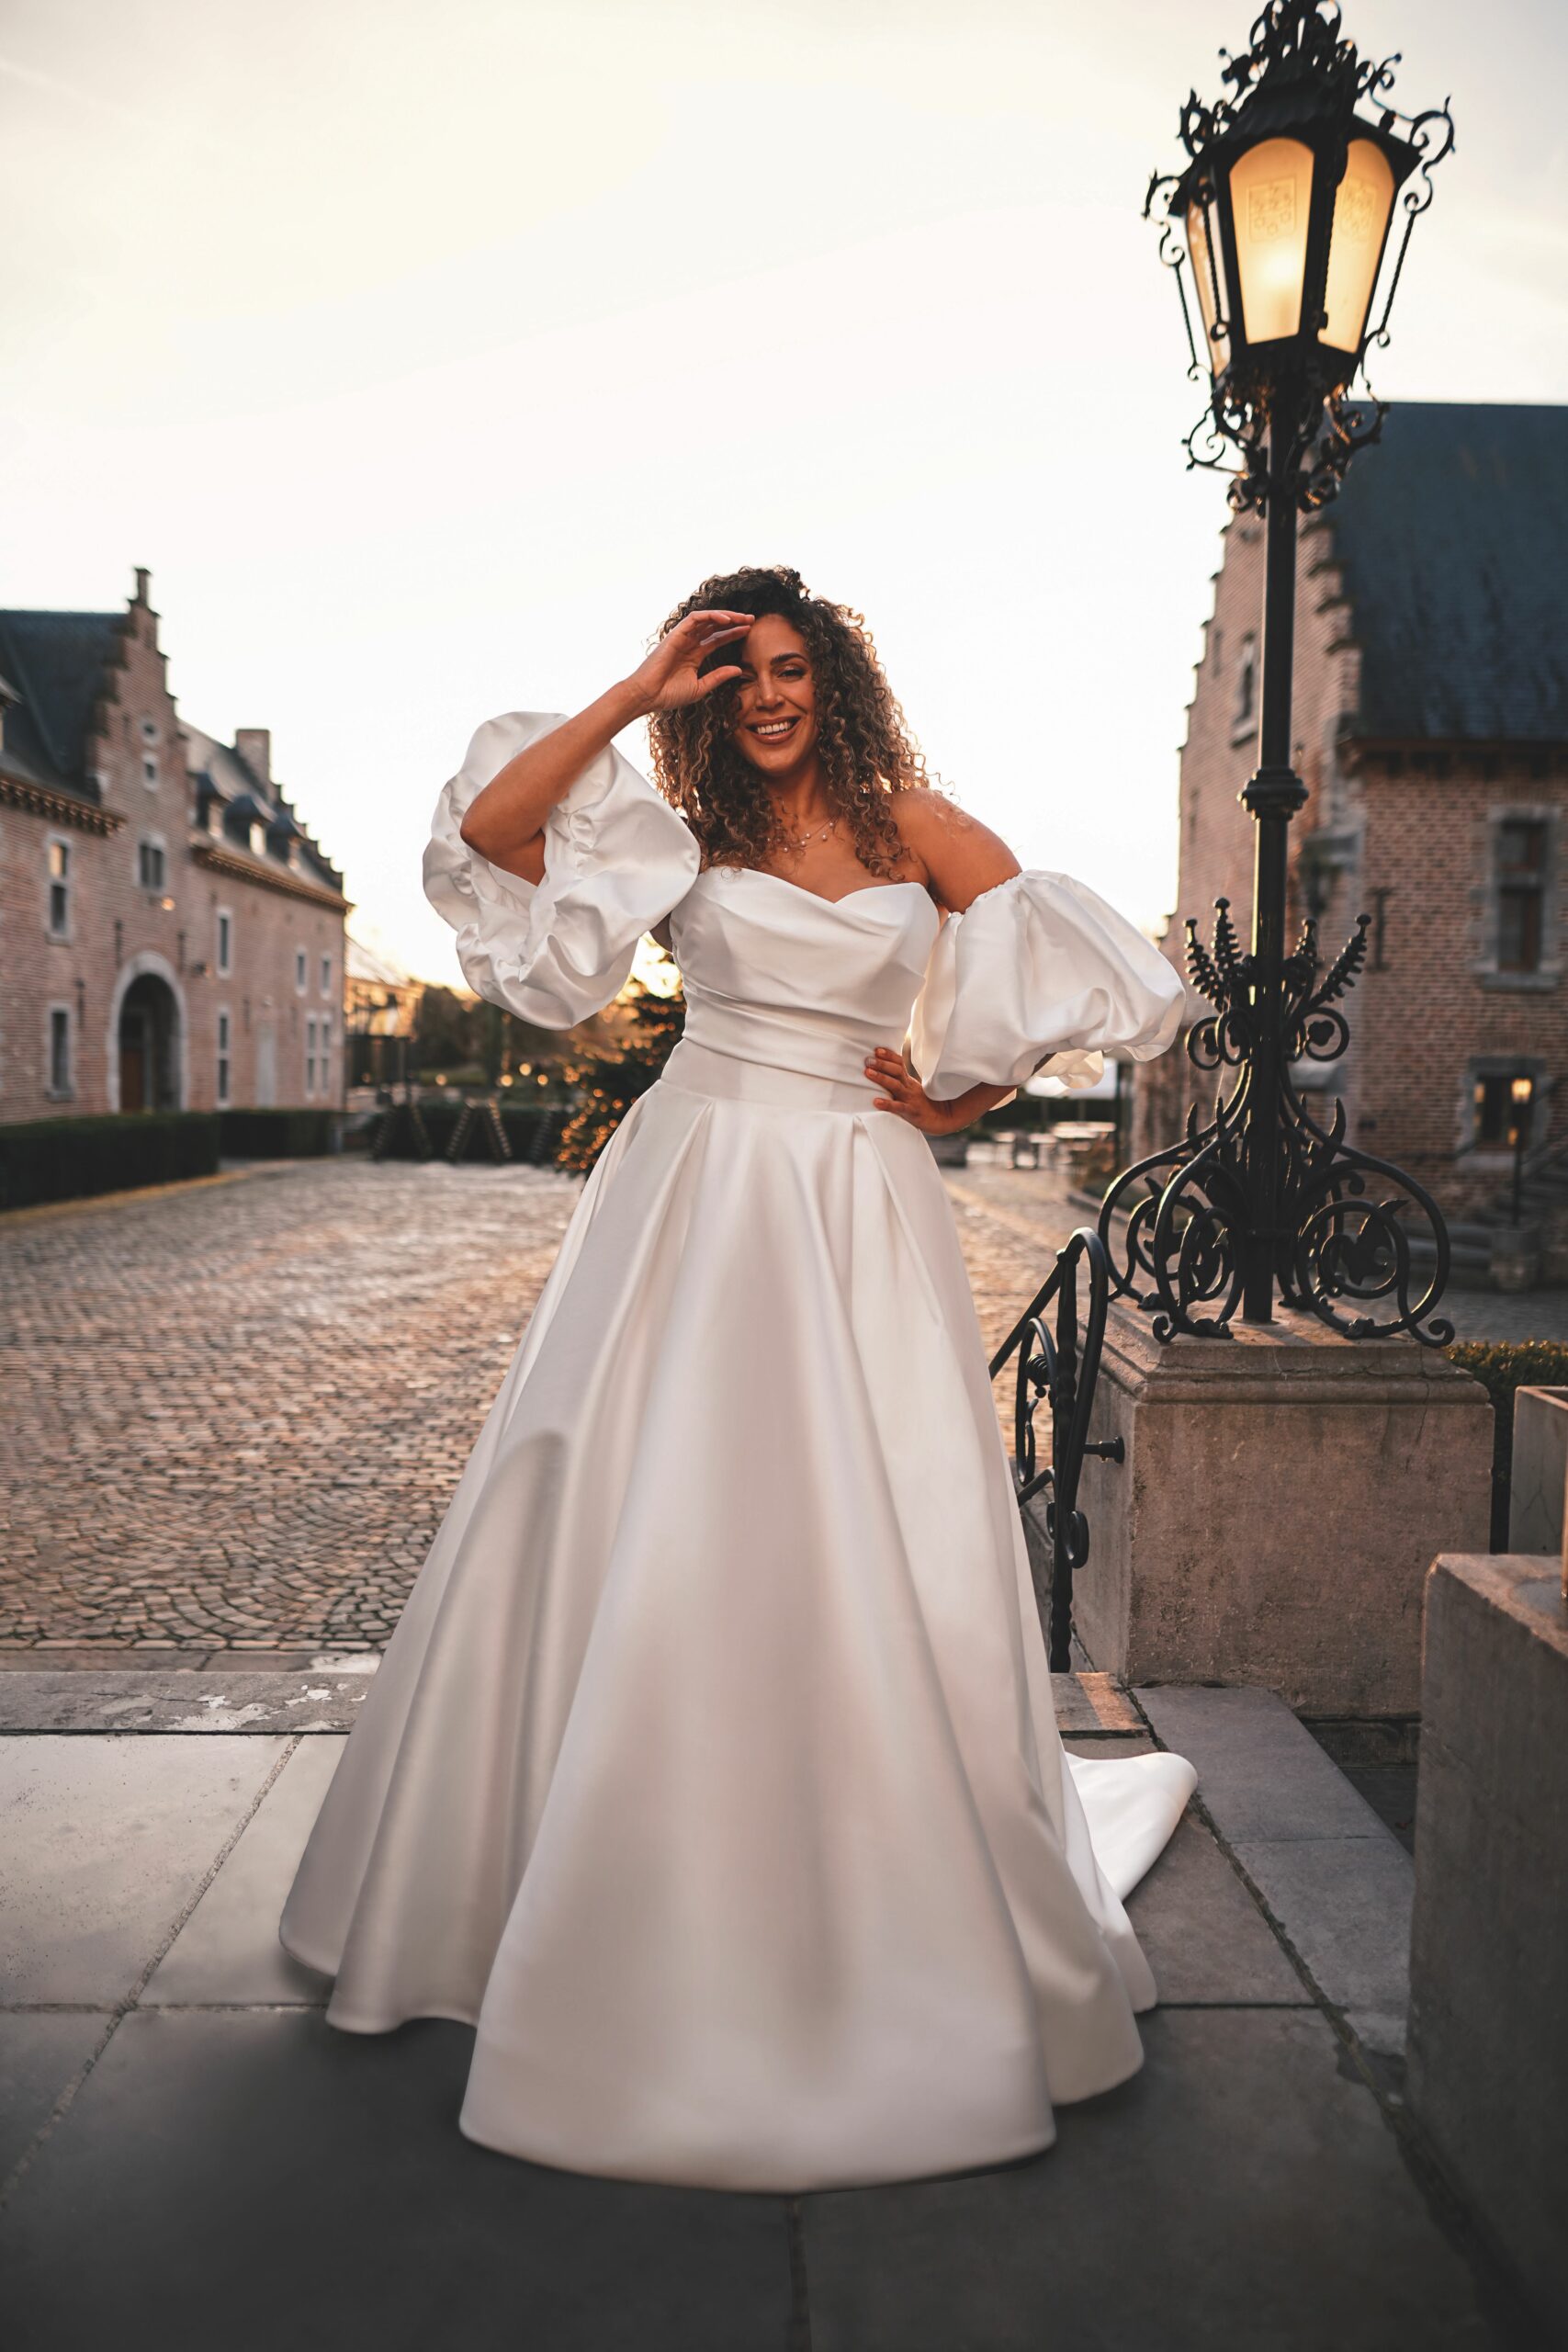 Embrace the timeless elegance of the Ilse dress, exquisitely crafted from luxurious mikado fabric. The A-line silhouette flows gracefully, creating a flattering and sophisticated look for any bride. The sweetheart neckline adds a touch of romance and femininity to the ensemble.